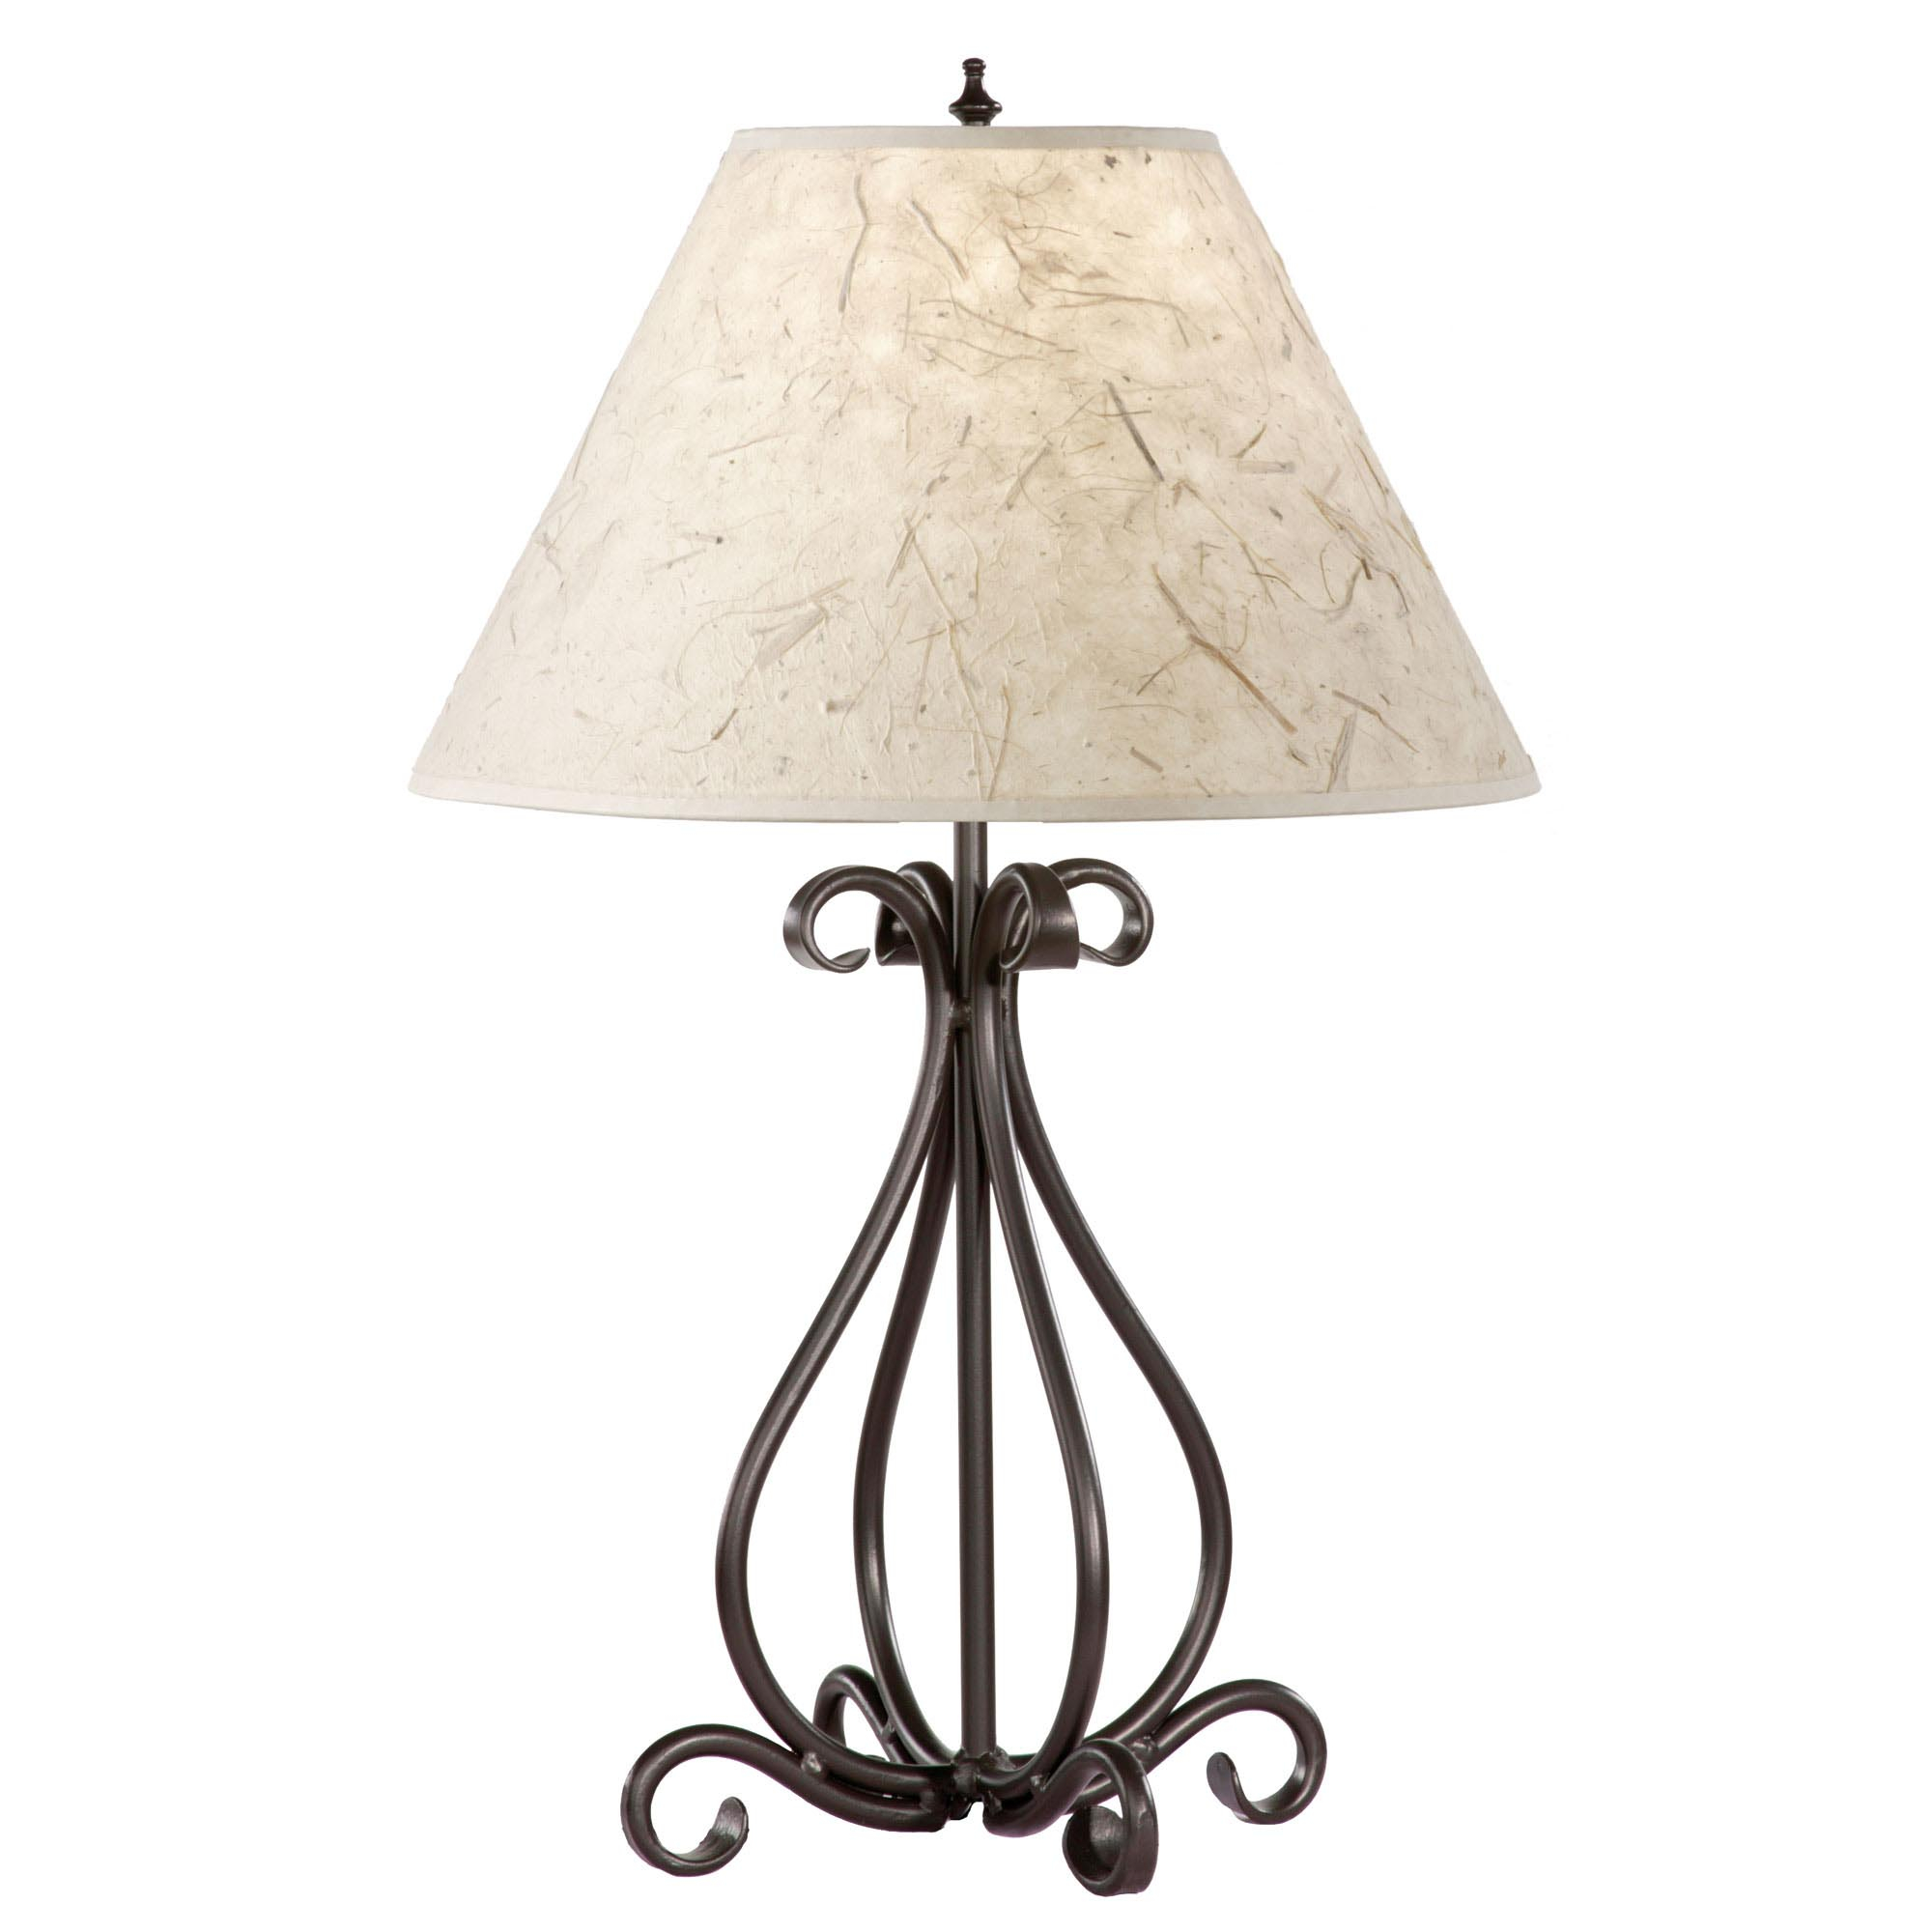 Rustic Wrought Iron Floor Lamps Light Fixtures Design Ideas within sizing 2000 X 2000